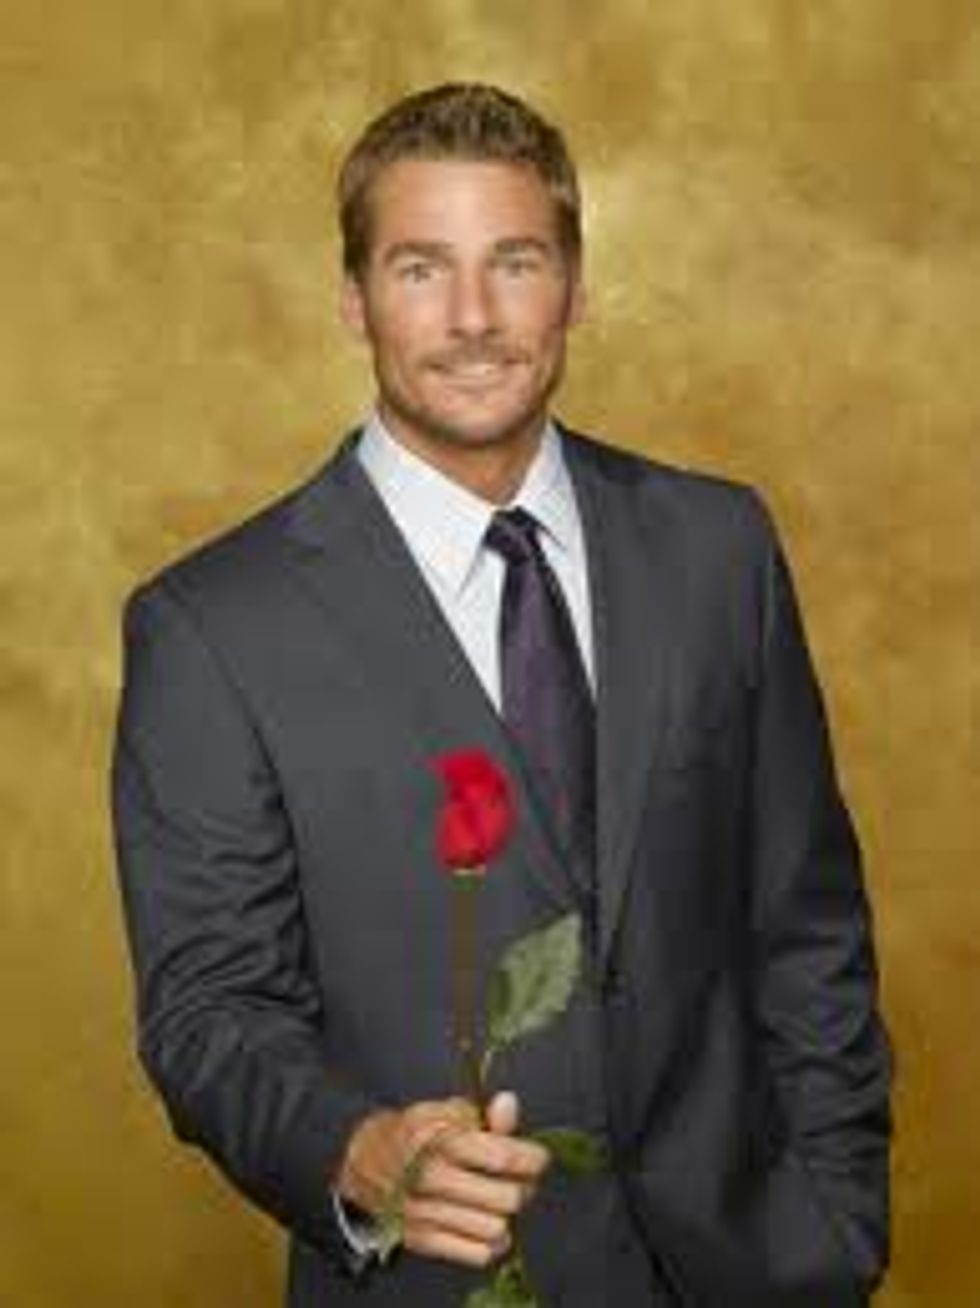 Why Is 'The Bachelor' Racist Against Hot Black Football Players?